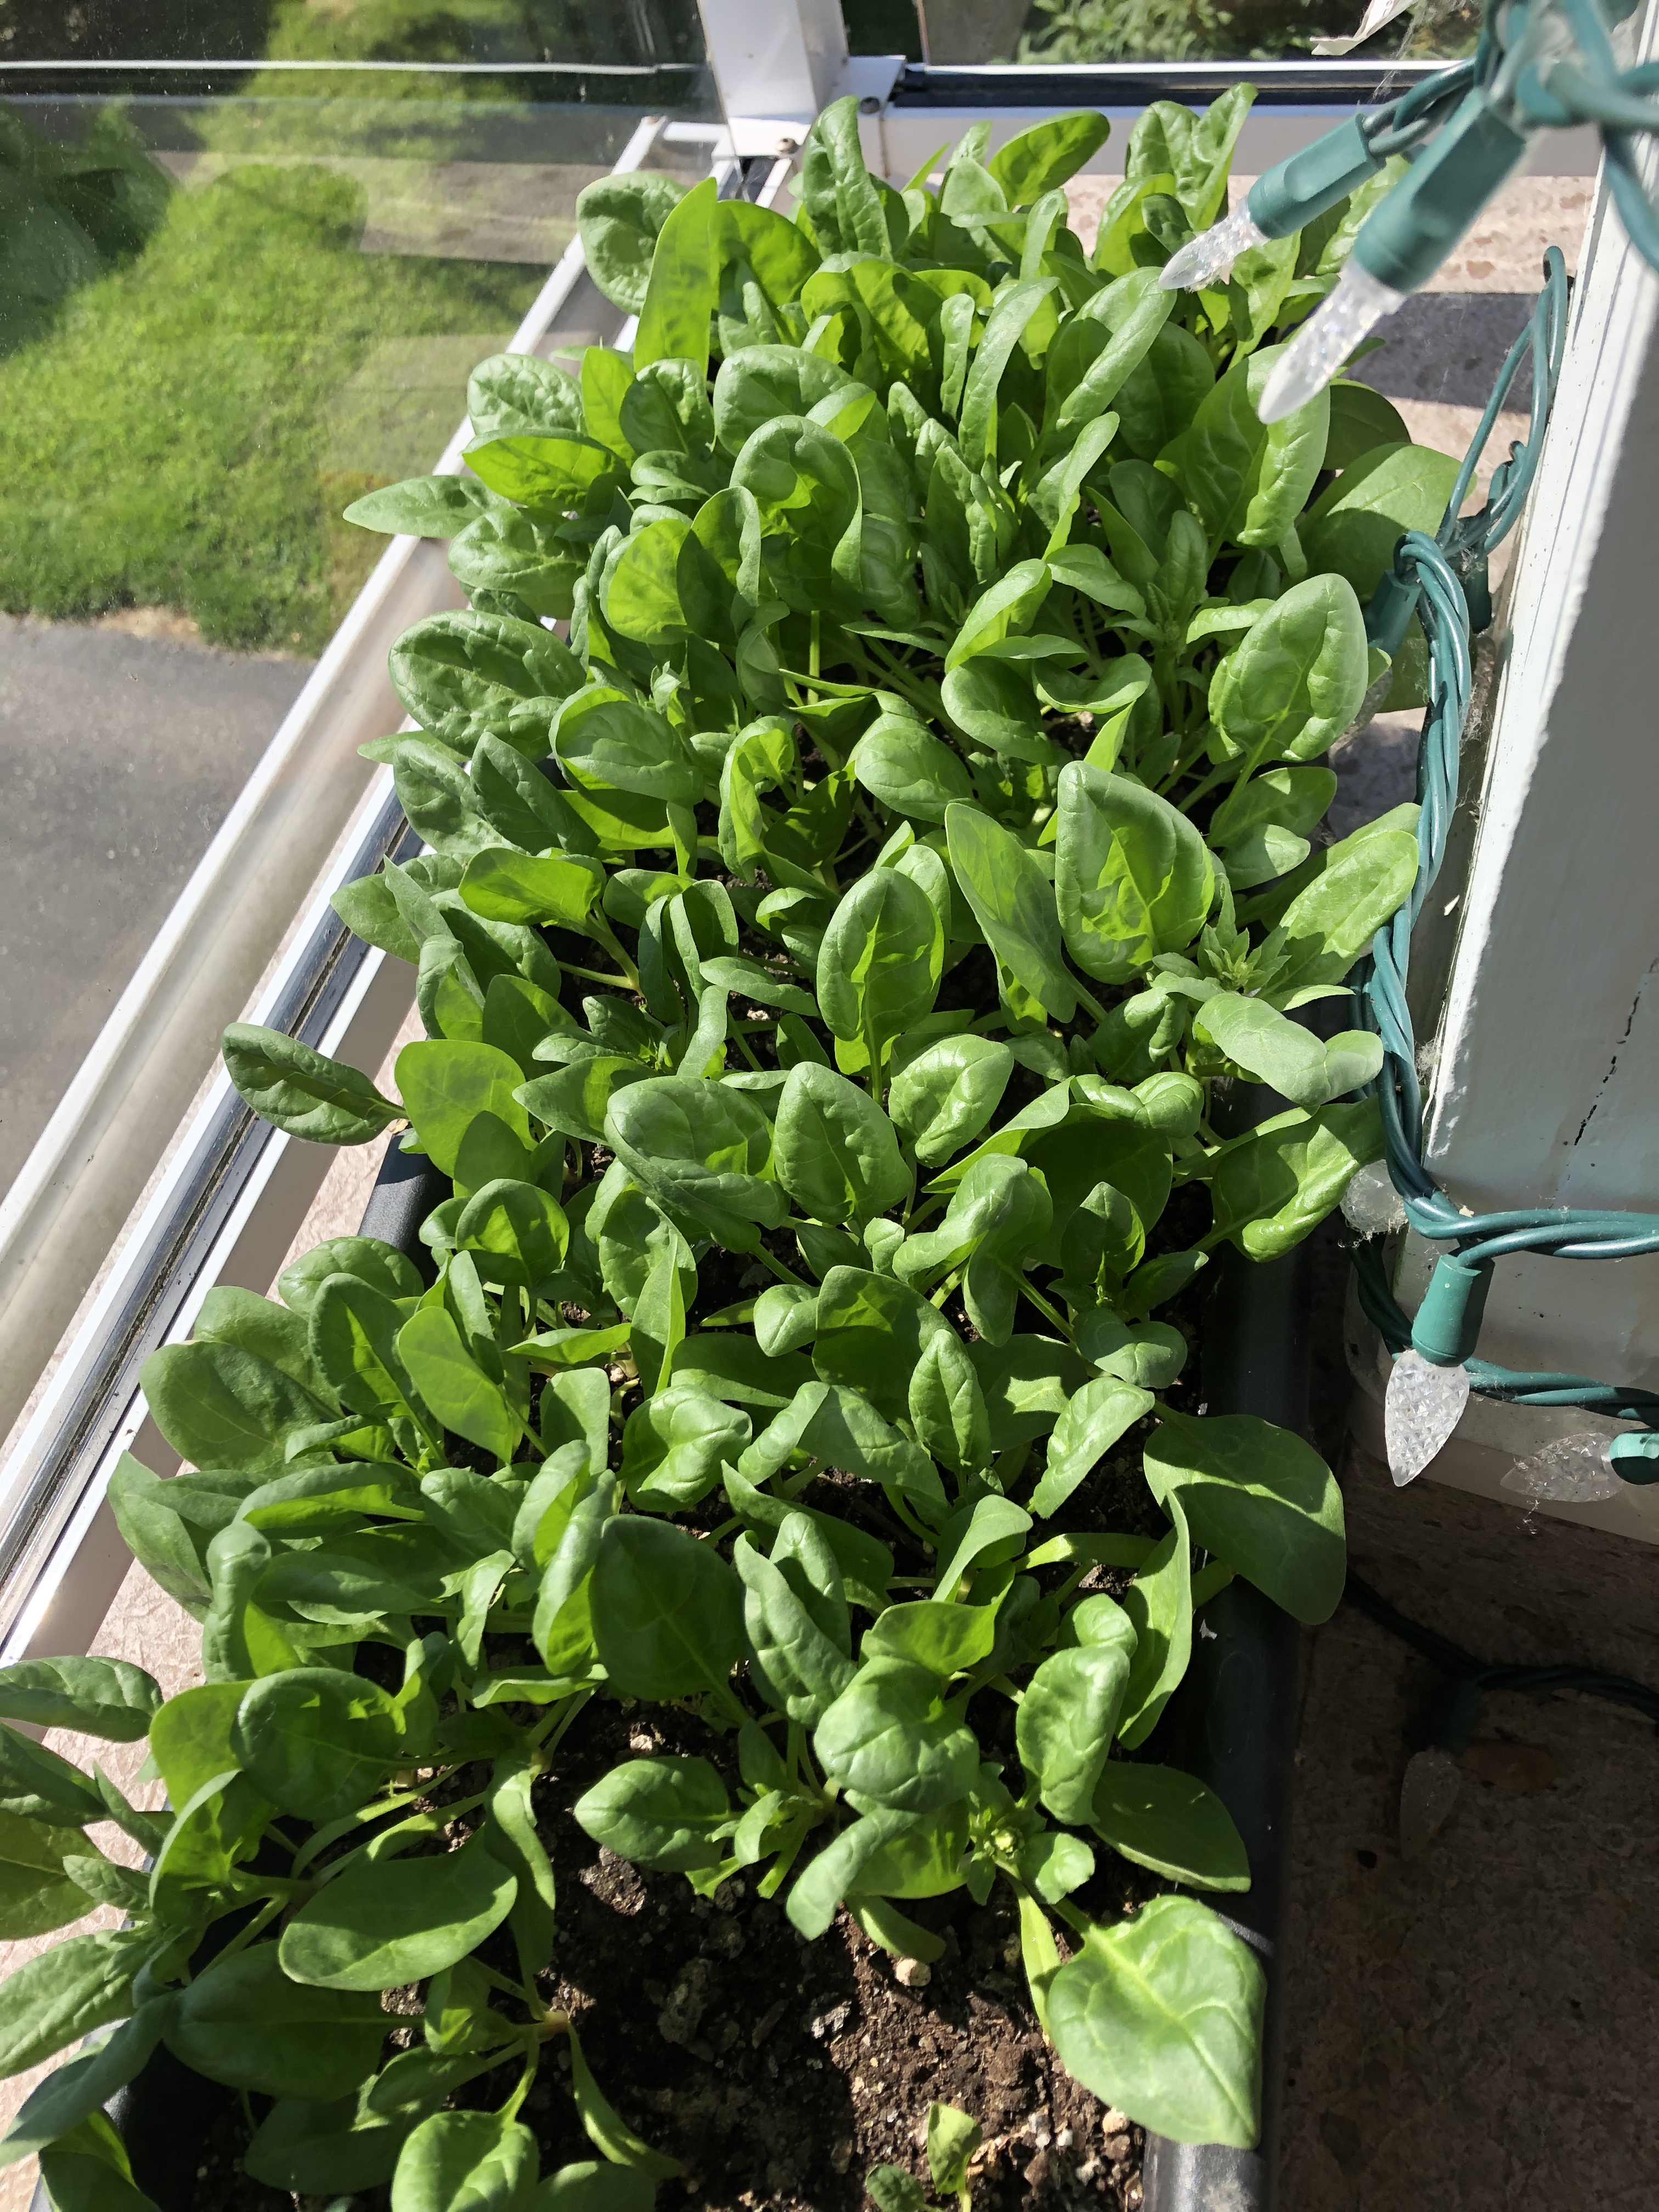 Growing your own food: spinach